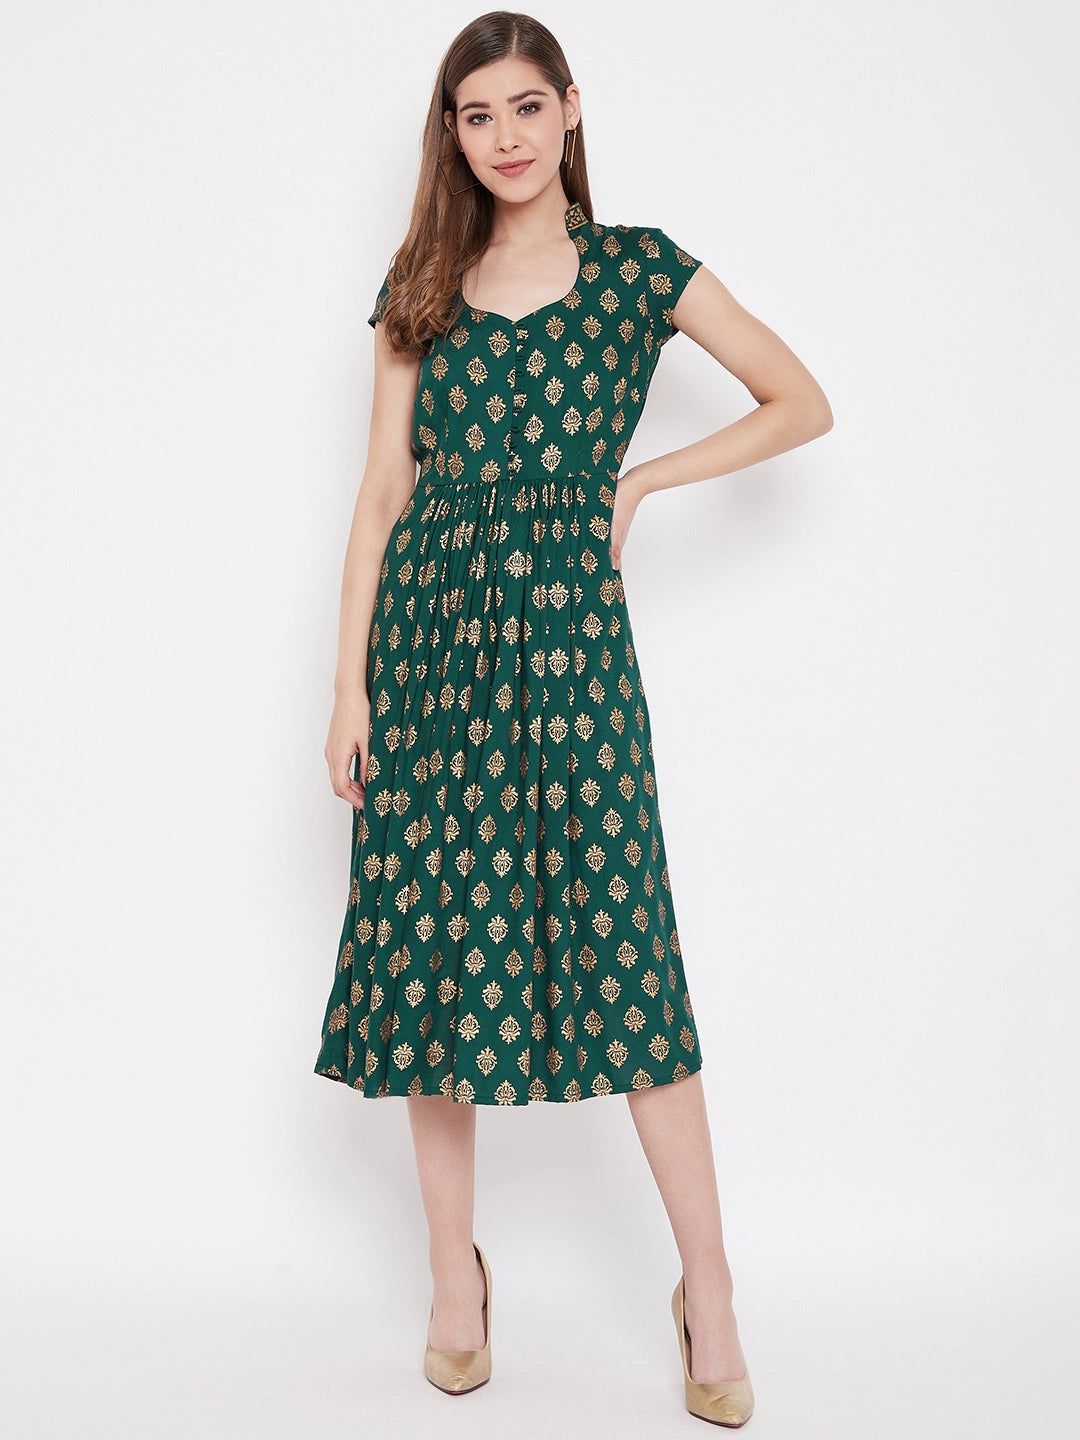 Midi Flare Dress with front loops